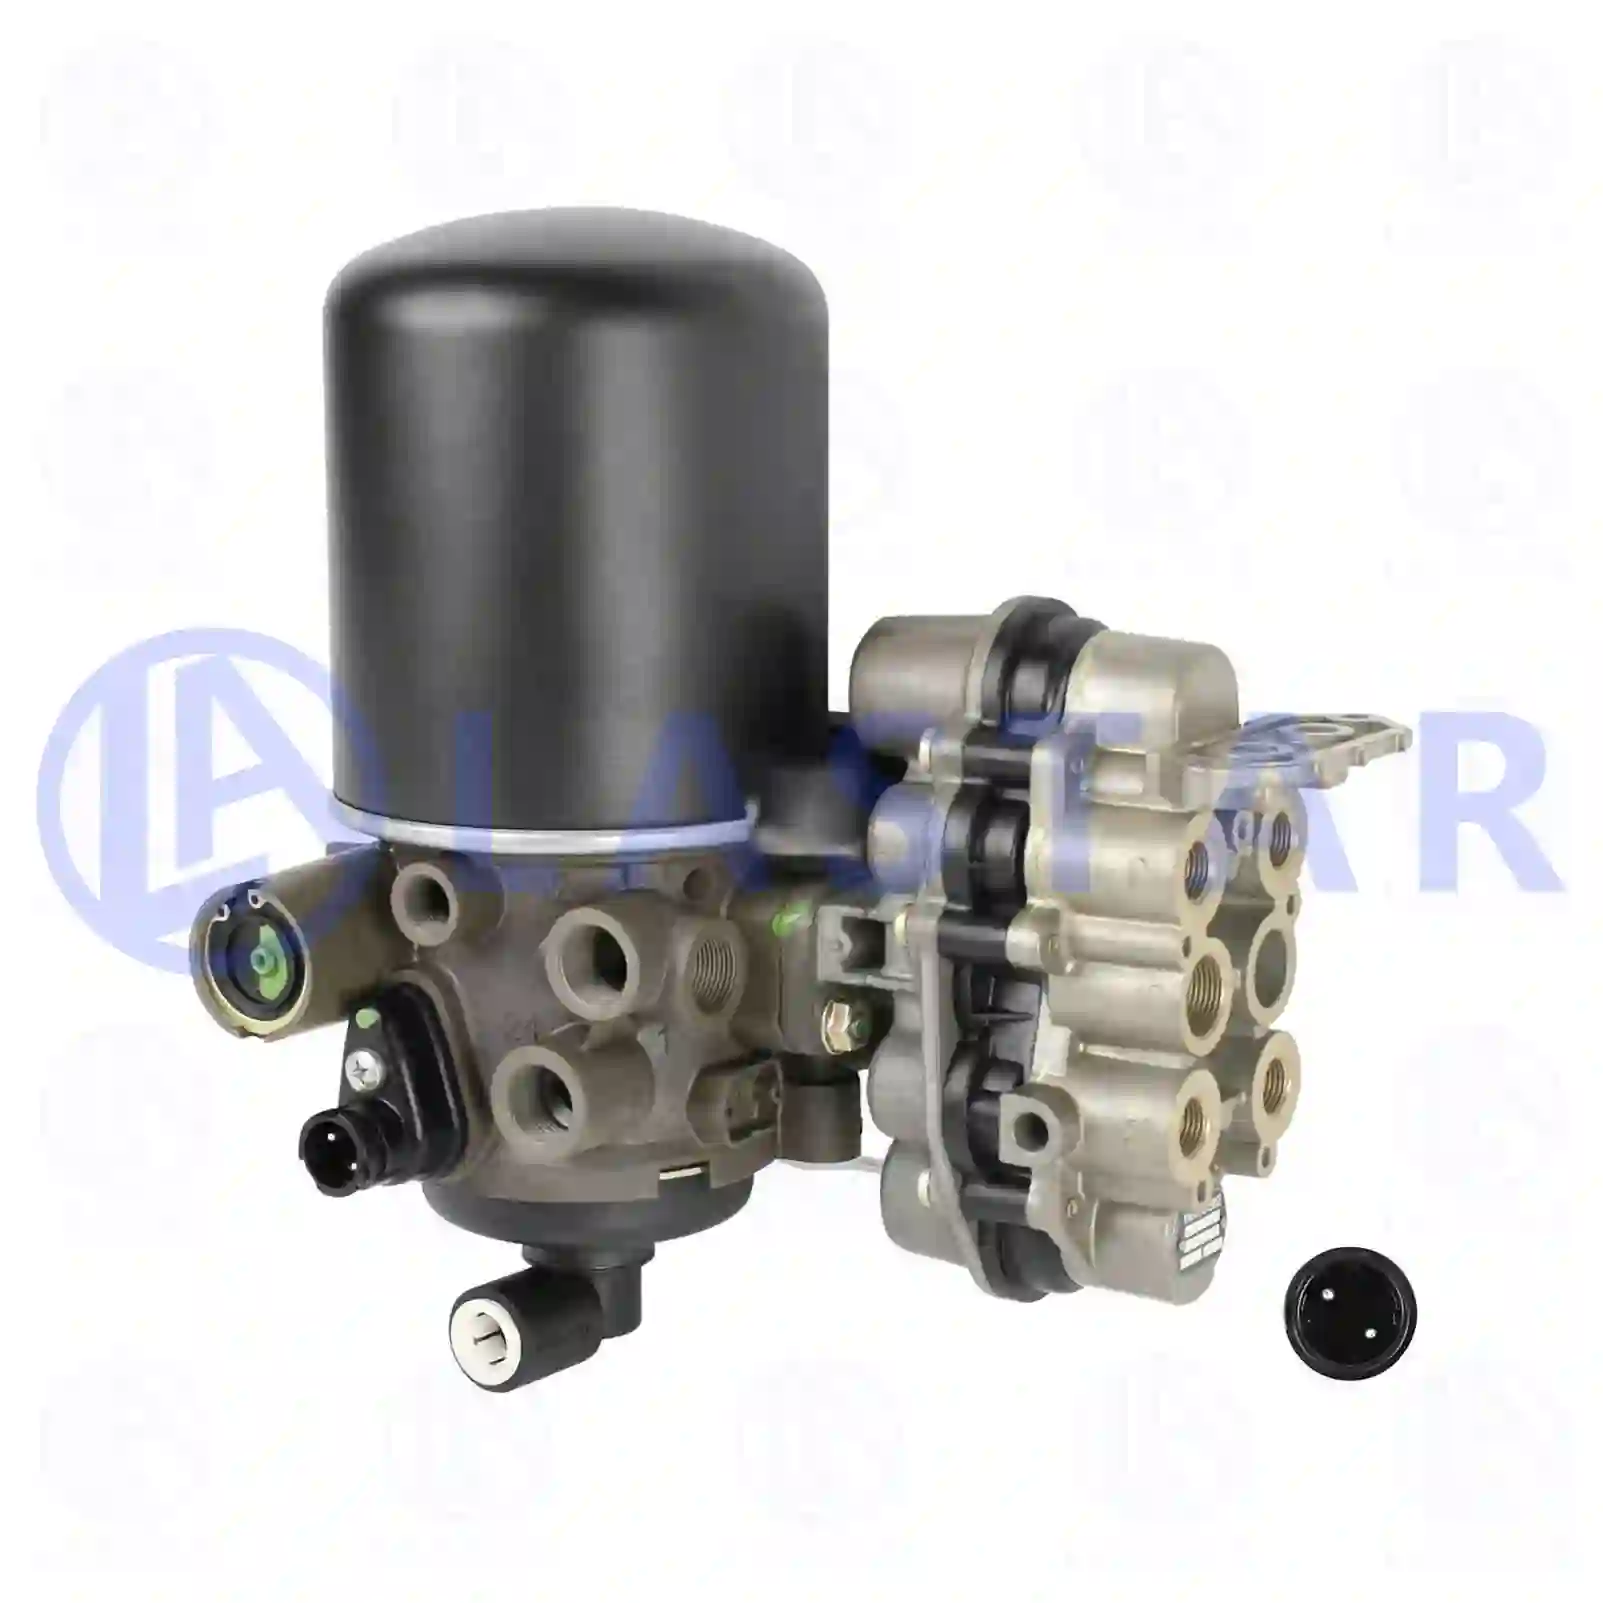 Air dryer, complete with valve, 77717043, 41032990, 41211253, 41211383, 41285077, 5801414914, 5801414915 ||  77717043 Lastar Spare Part | Truck Spare Parts, Auotomotive Spare Parts Air dryer, complete with valve, 77717043, 41032990, 41211253, 41211383, 41285077, 5801414914, 5801414915 ||  77717043 Lastar Spare Part | Truck Spare Parts, Auotomotive Spare Parts